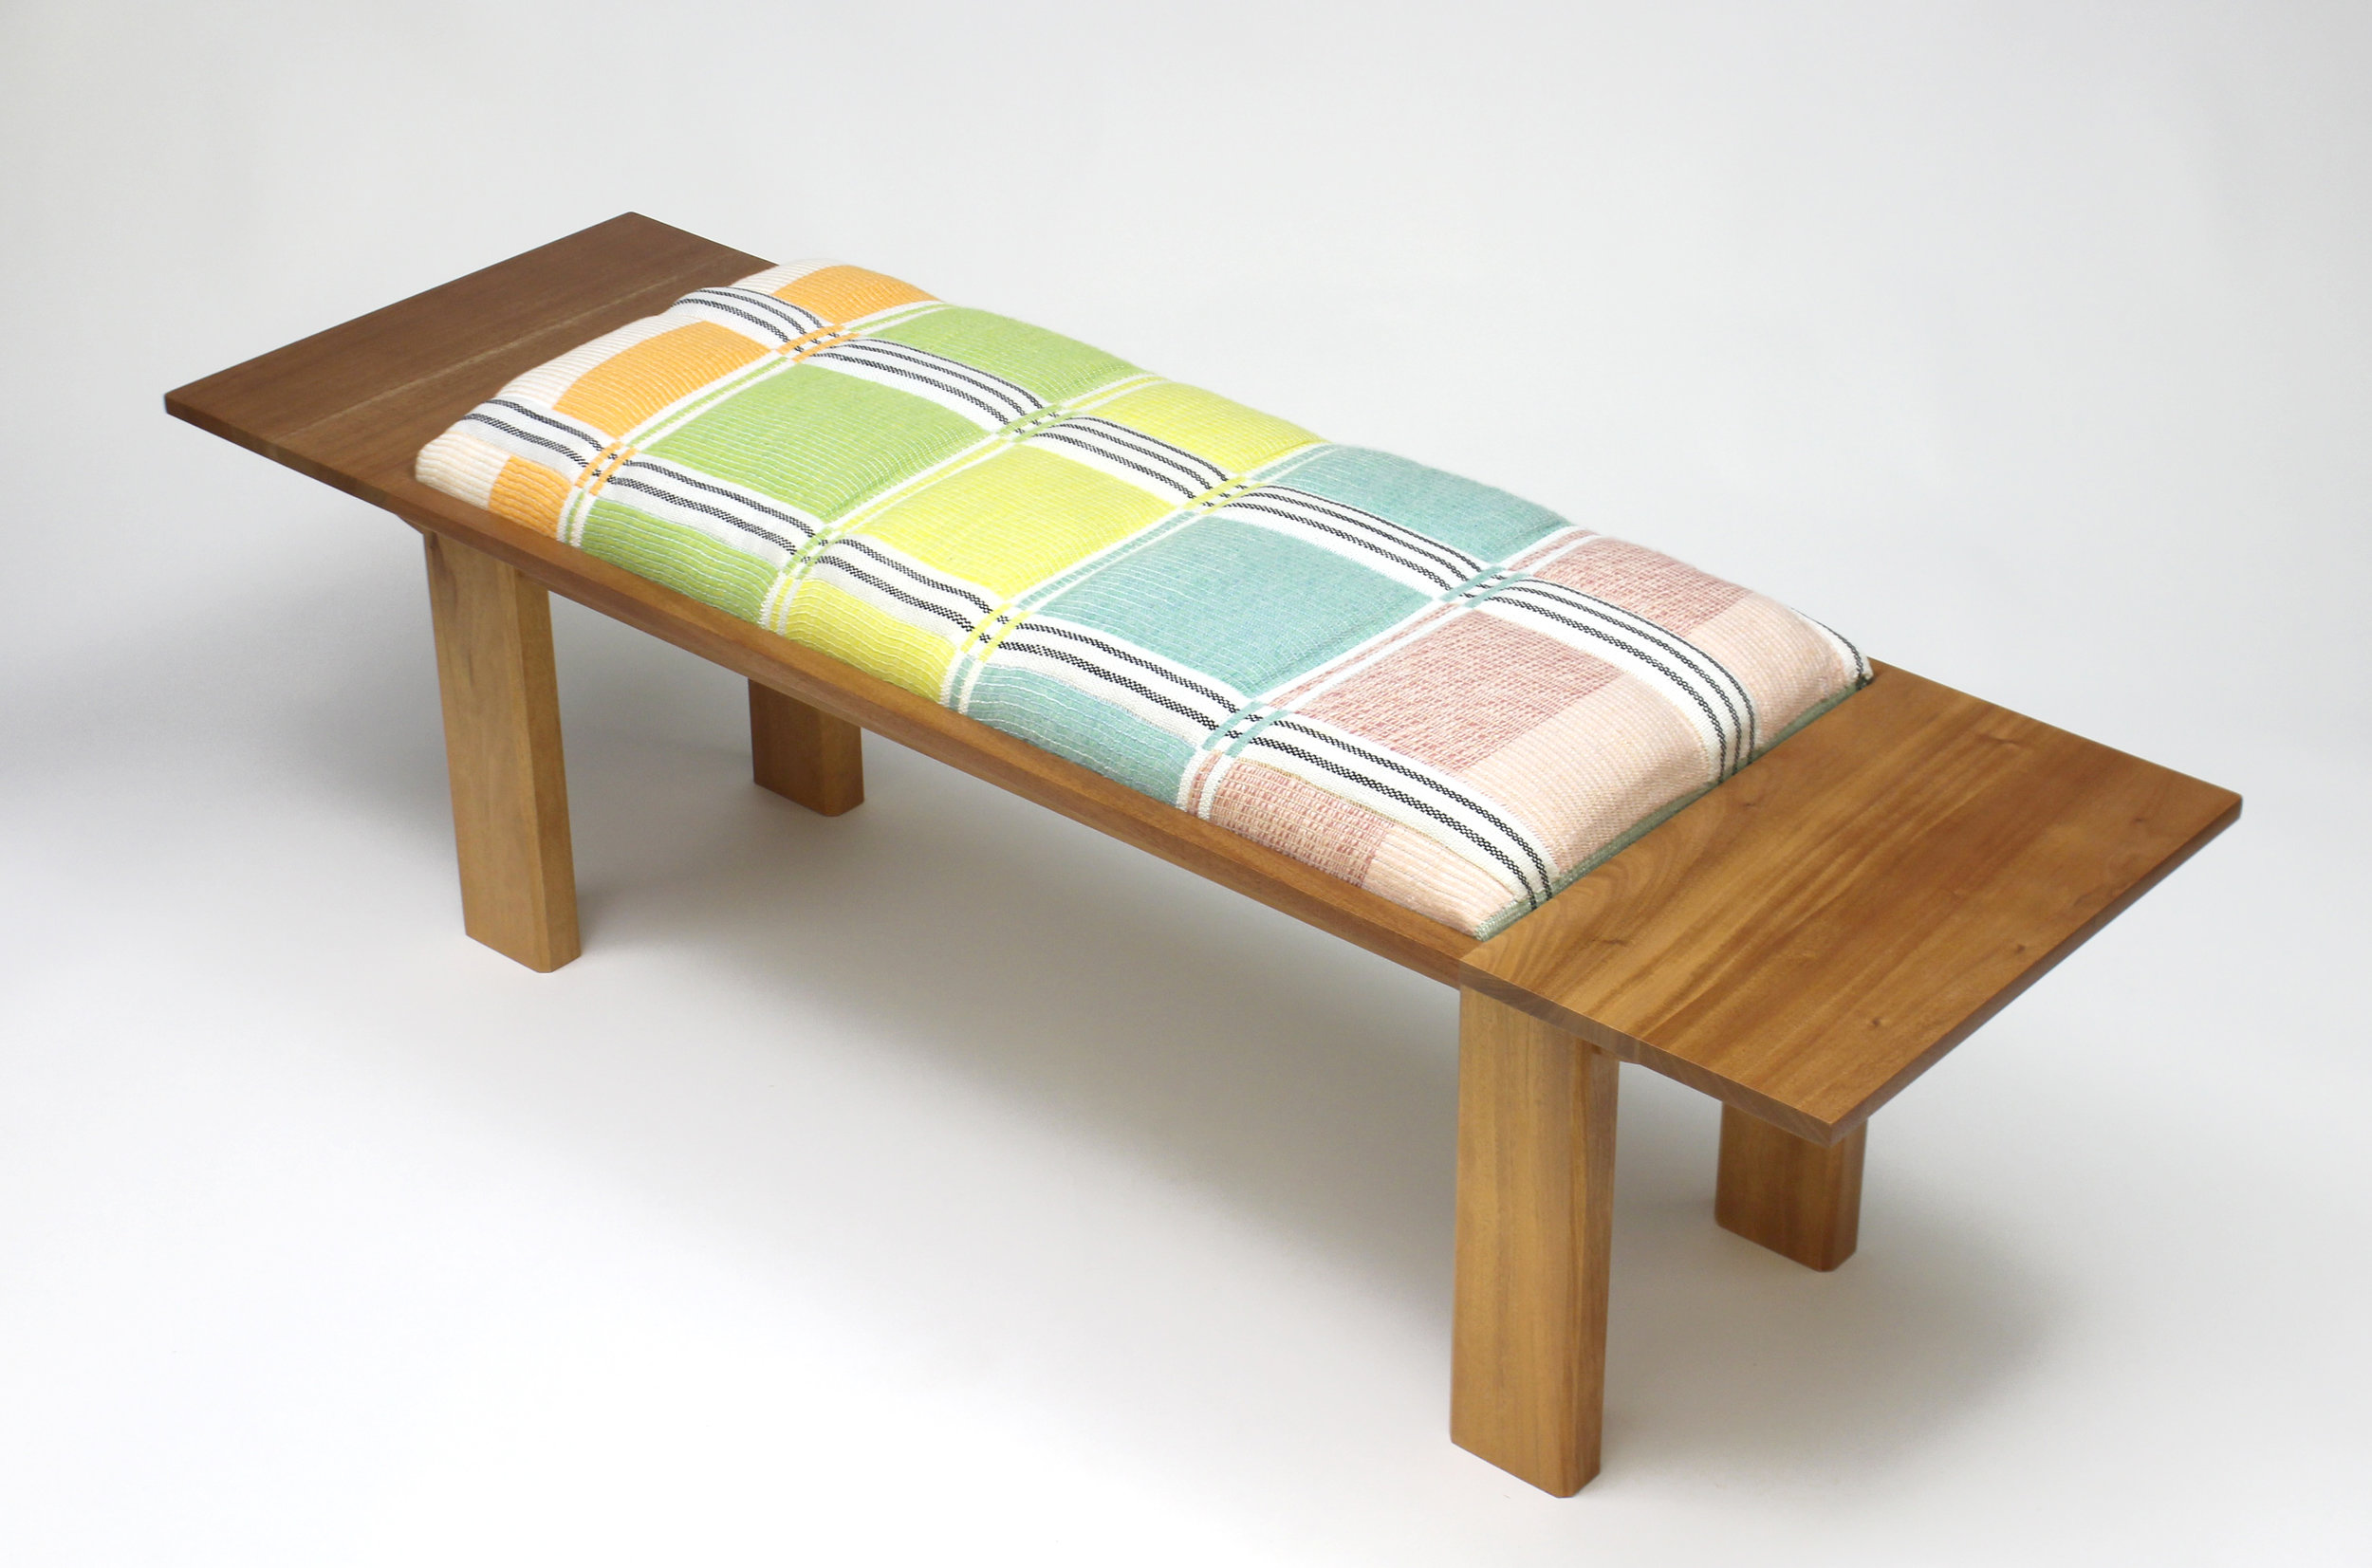 The Double Cloth Bench